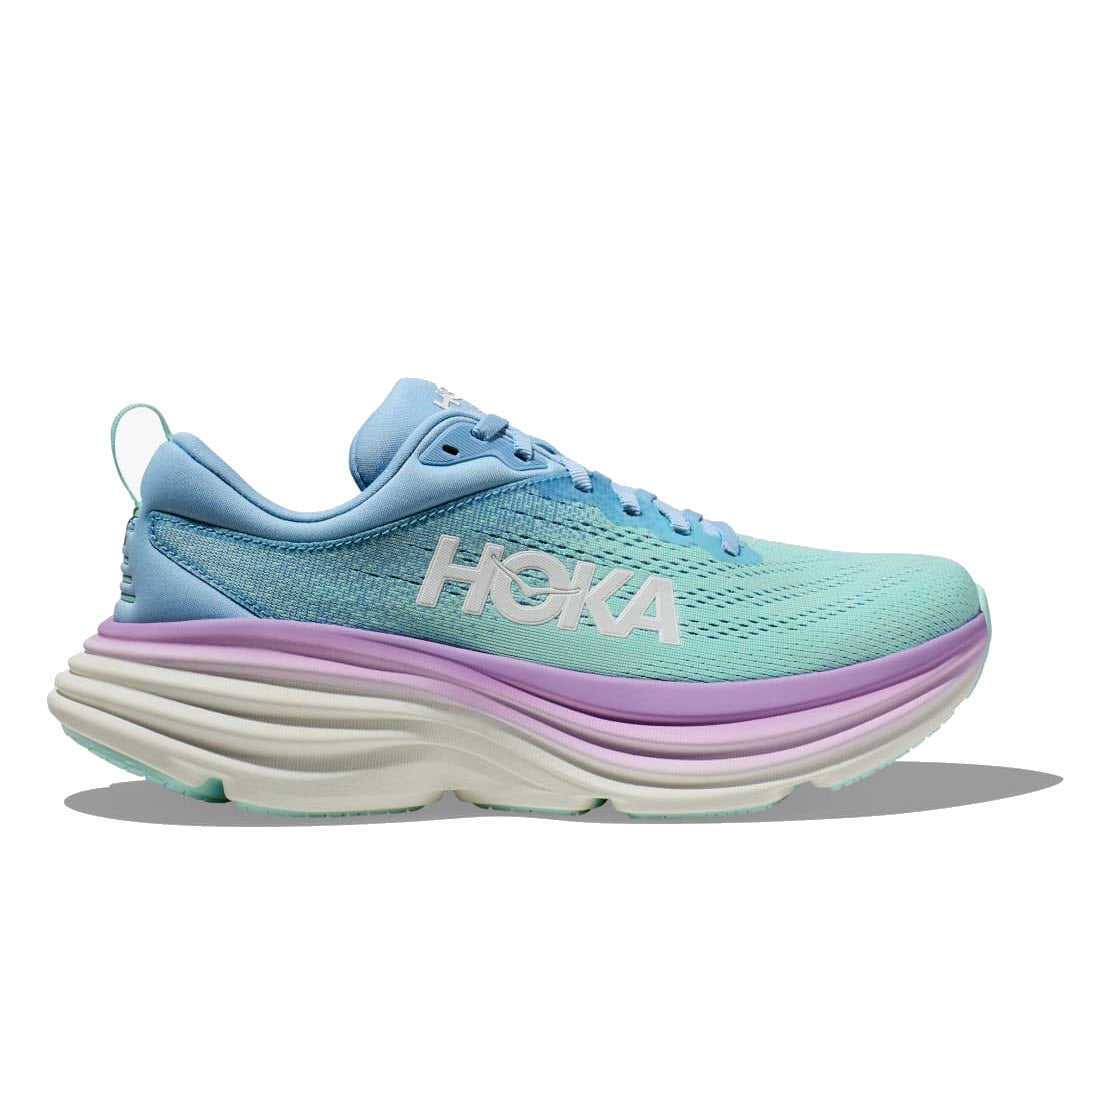 A turquoise and lavender athletic shoe with white "Hoka" branding on the side, featuring a thick, ultra-cushioned sole made from softer, lighter foams is the HOKA BONDI 8 AIRY BLUE/SUNLIT OCEAN - WOMEN.